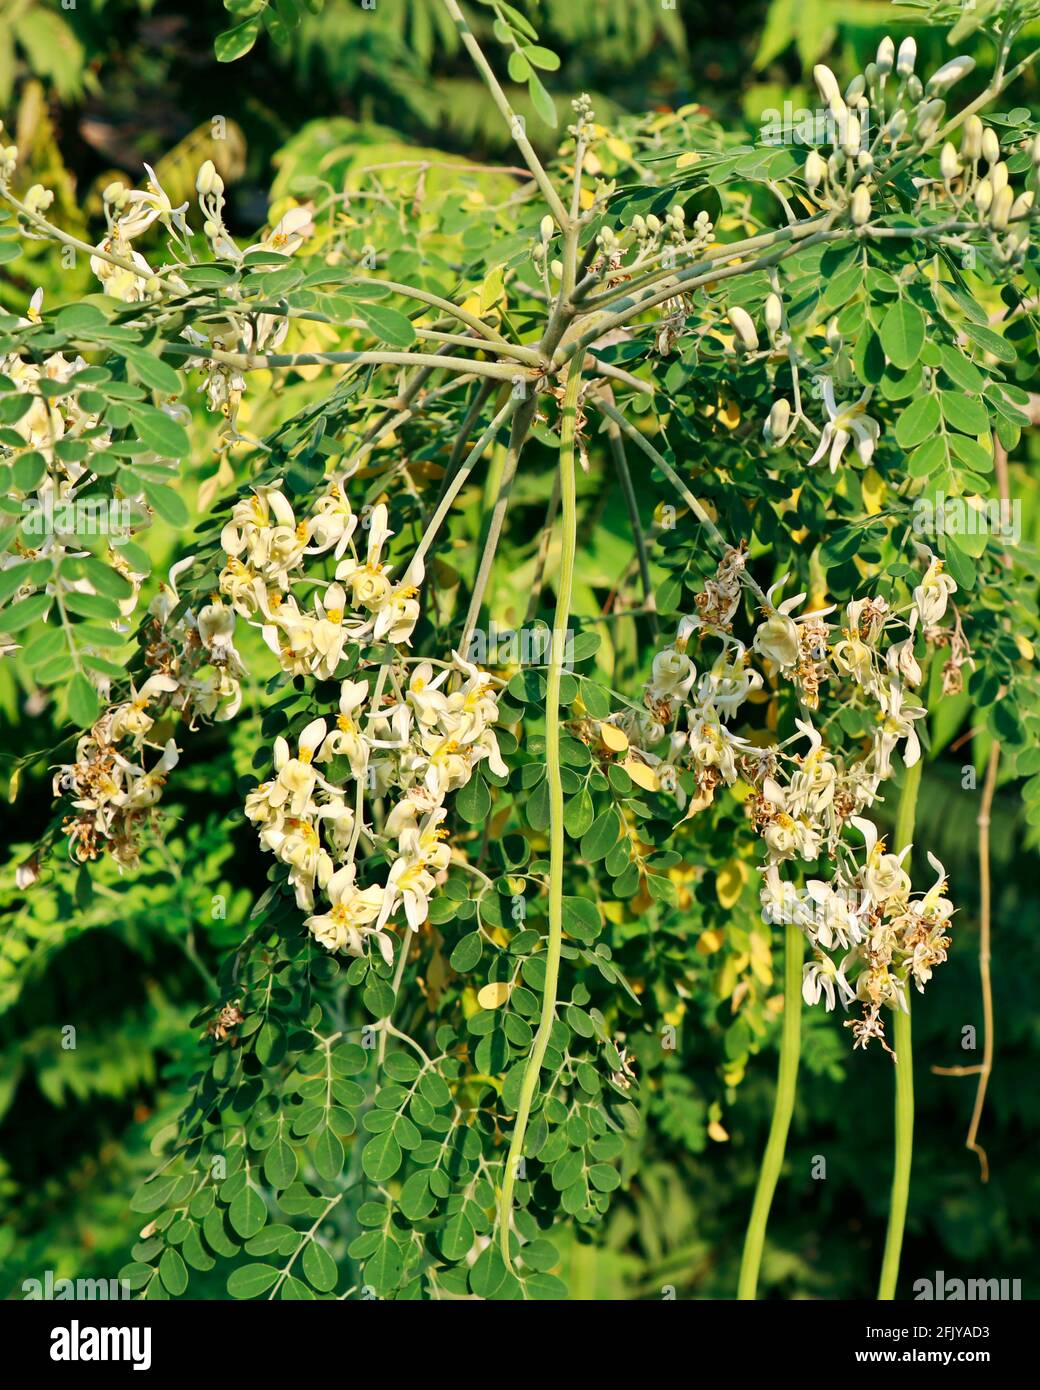 Moringa oleifera is a drought-resistant tree of the family Moringaceae, native to the Indian subcontinent. Common names include moringa, drumstick tre Stock Photo